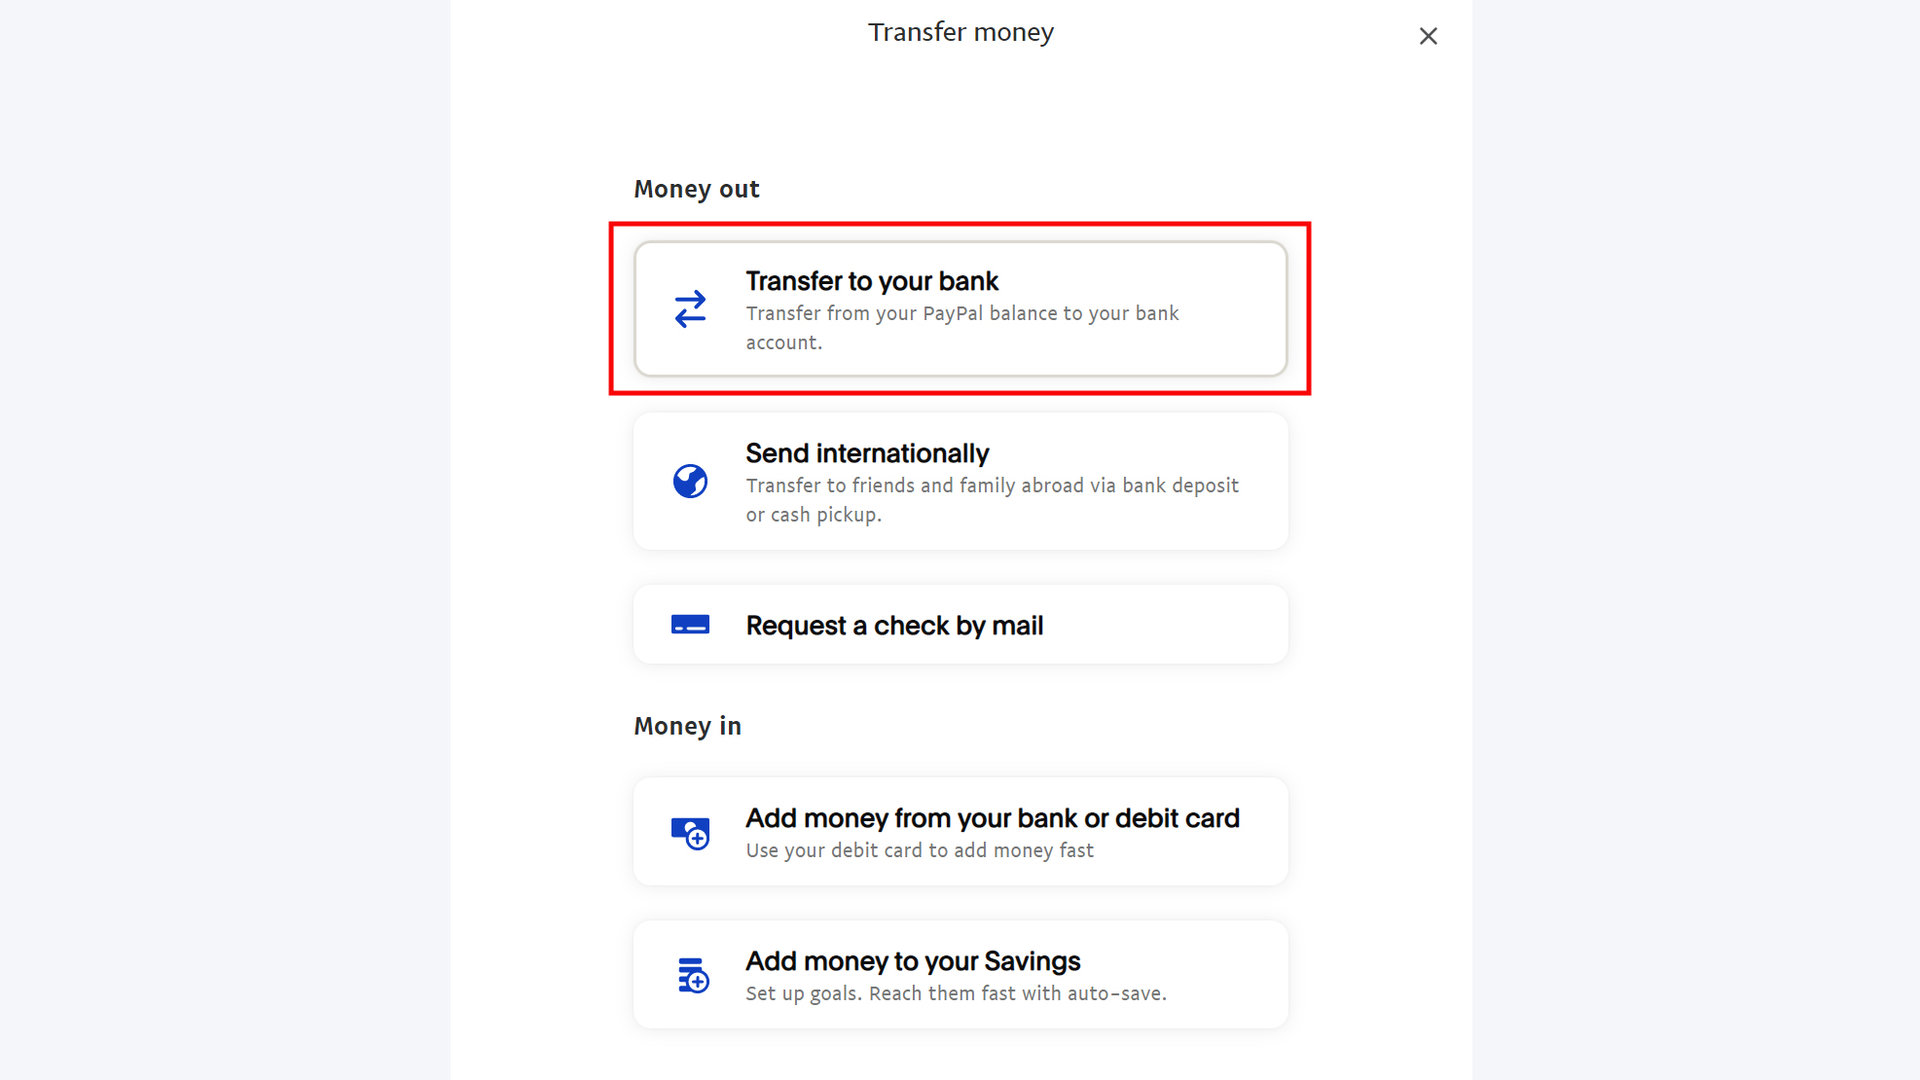 How to transfer from PayPal to bank 2